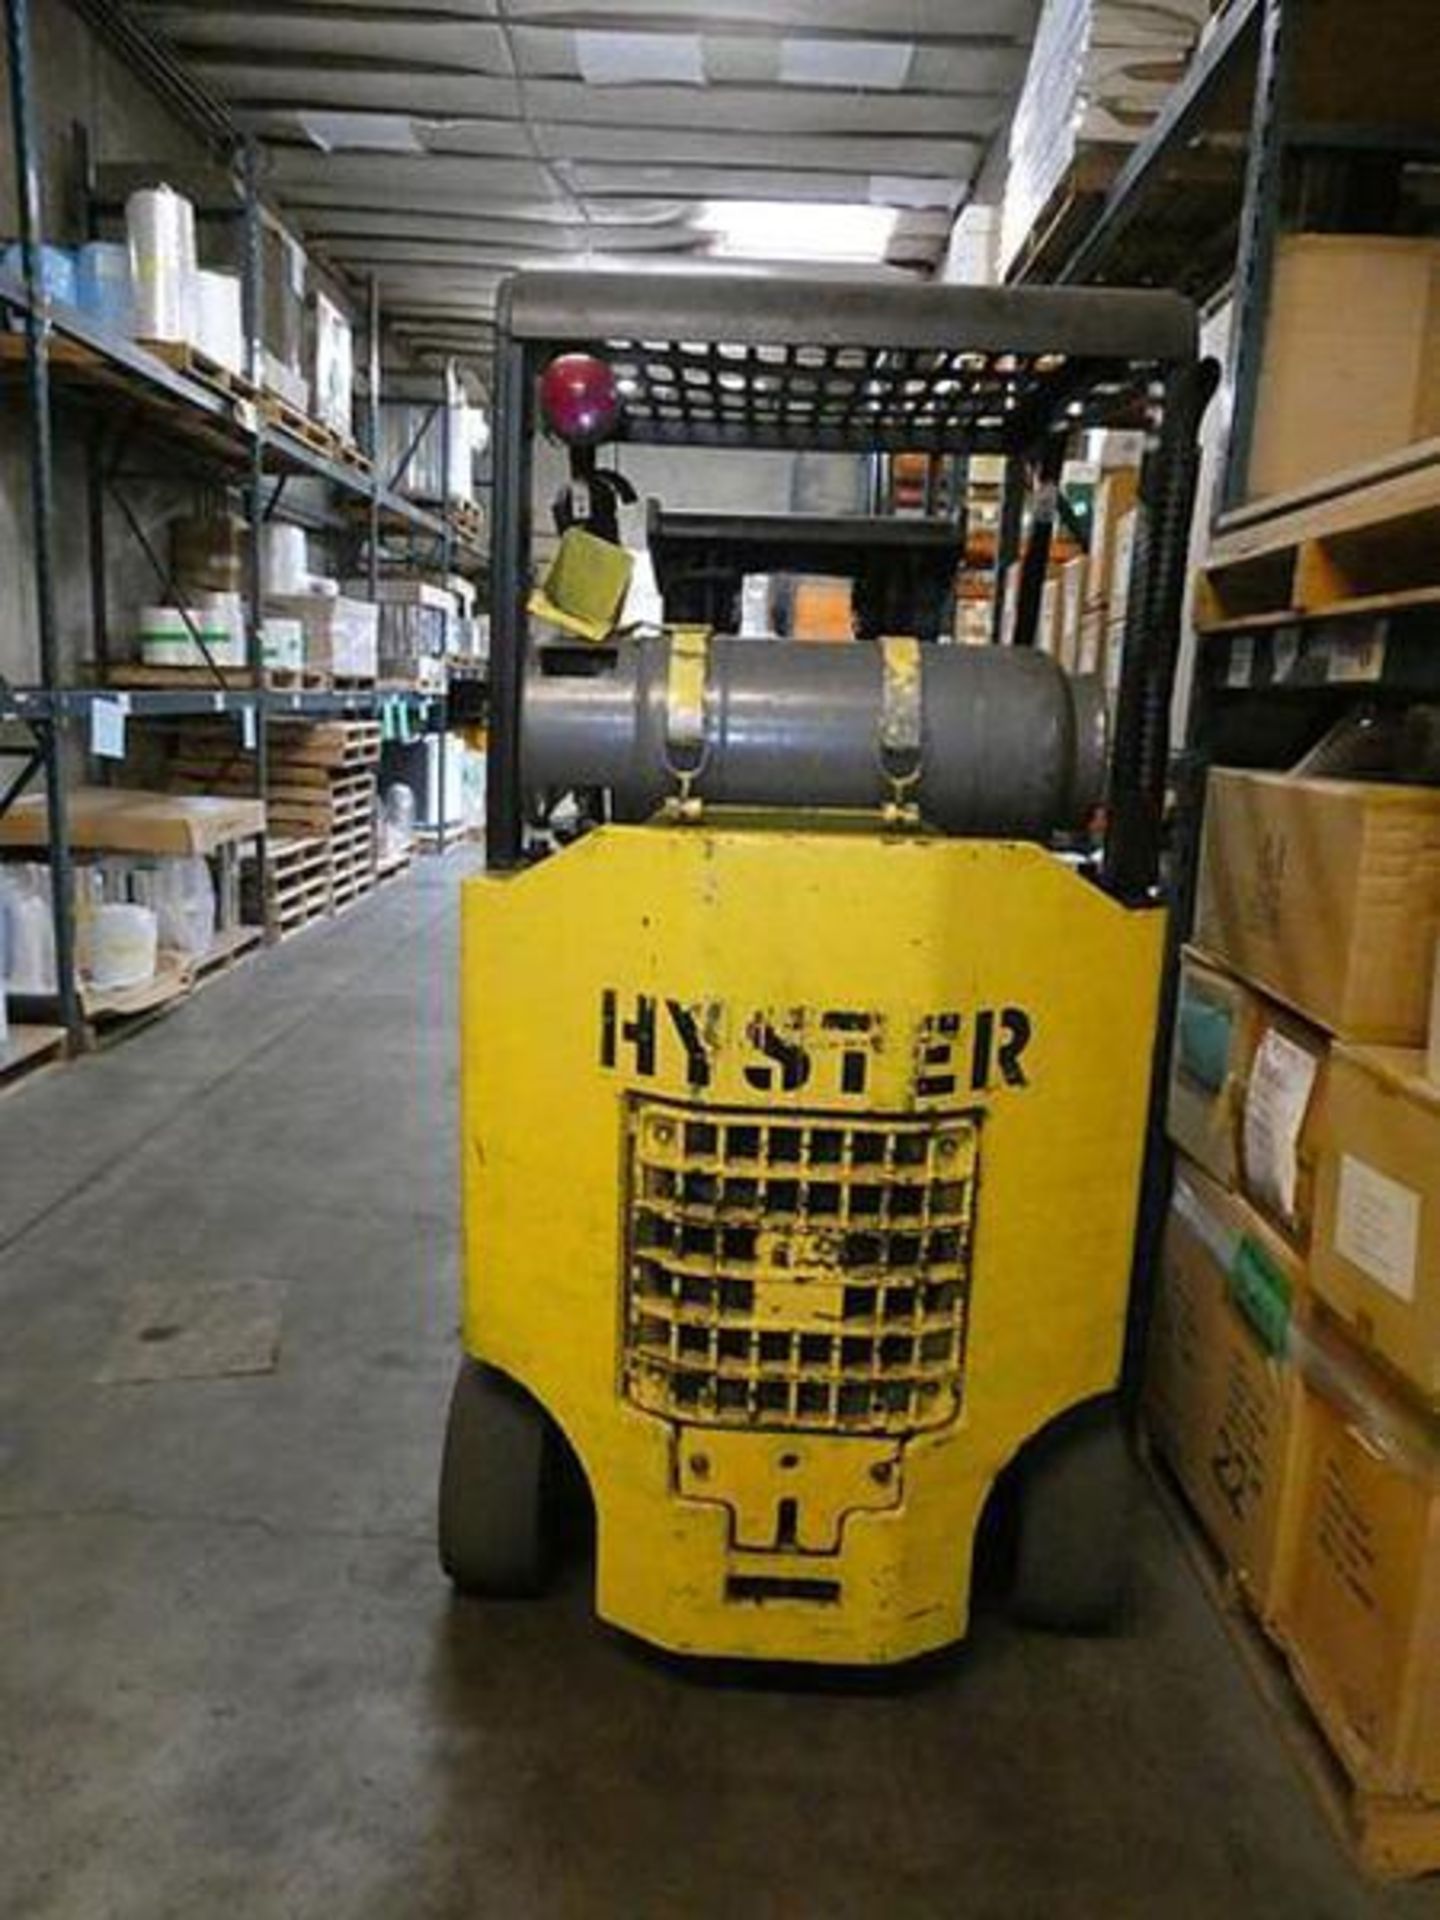 8,000 POUND HYSTER S80EBCS FORKLIFT PROPANE POWERED - Image 3 of 5